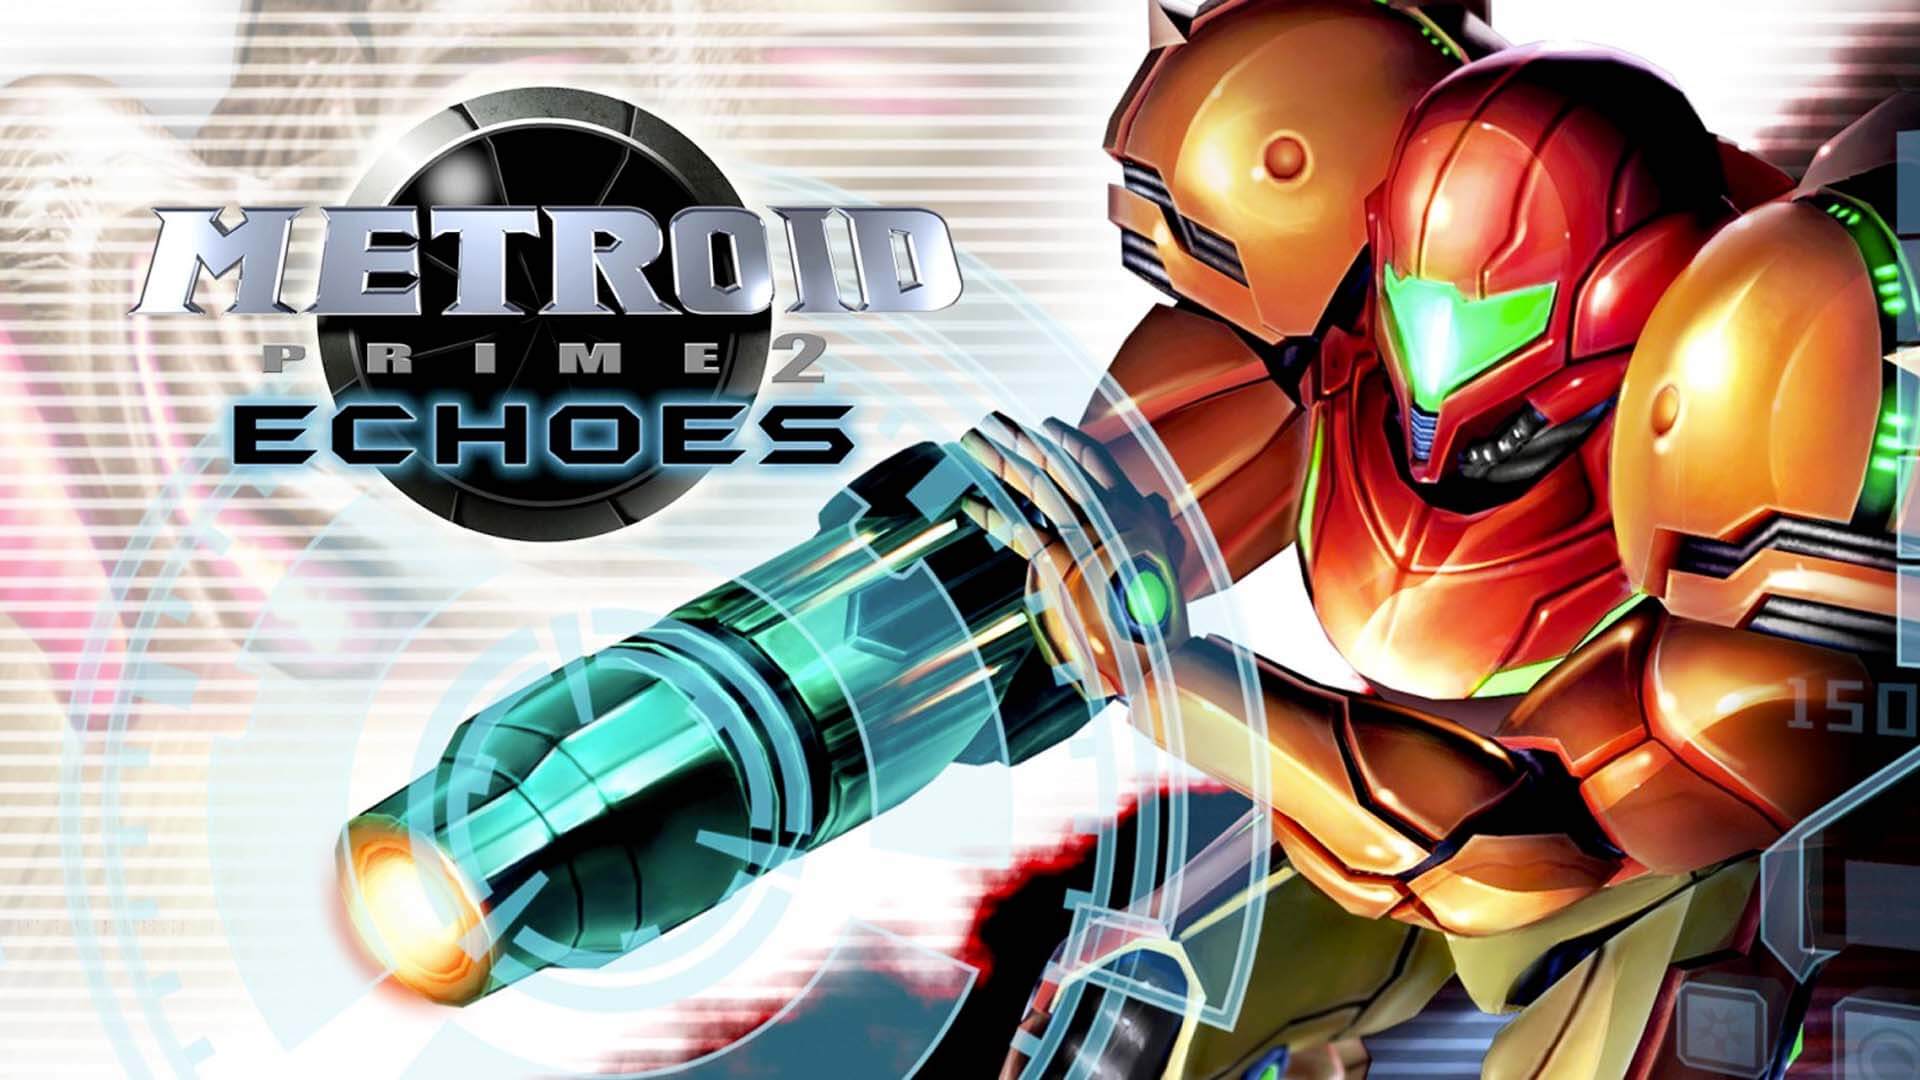 Metroid Prime 2: Echoes and Metroid Prime 3: Corruption